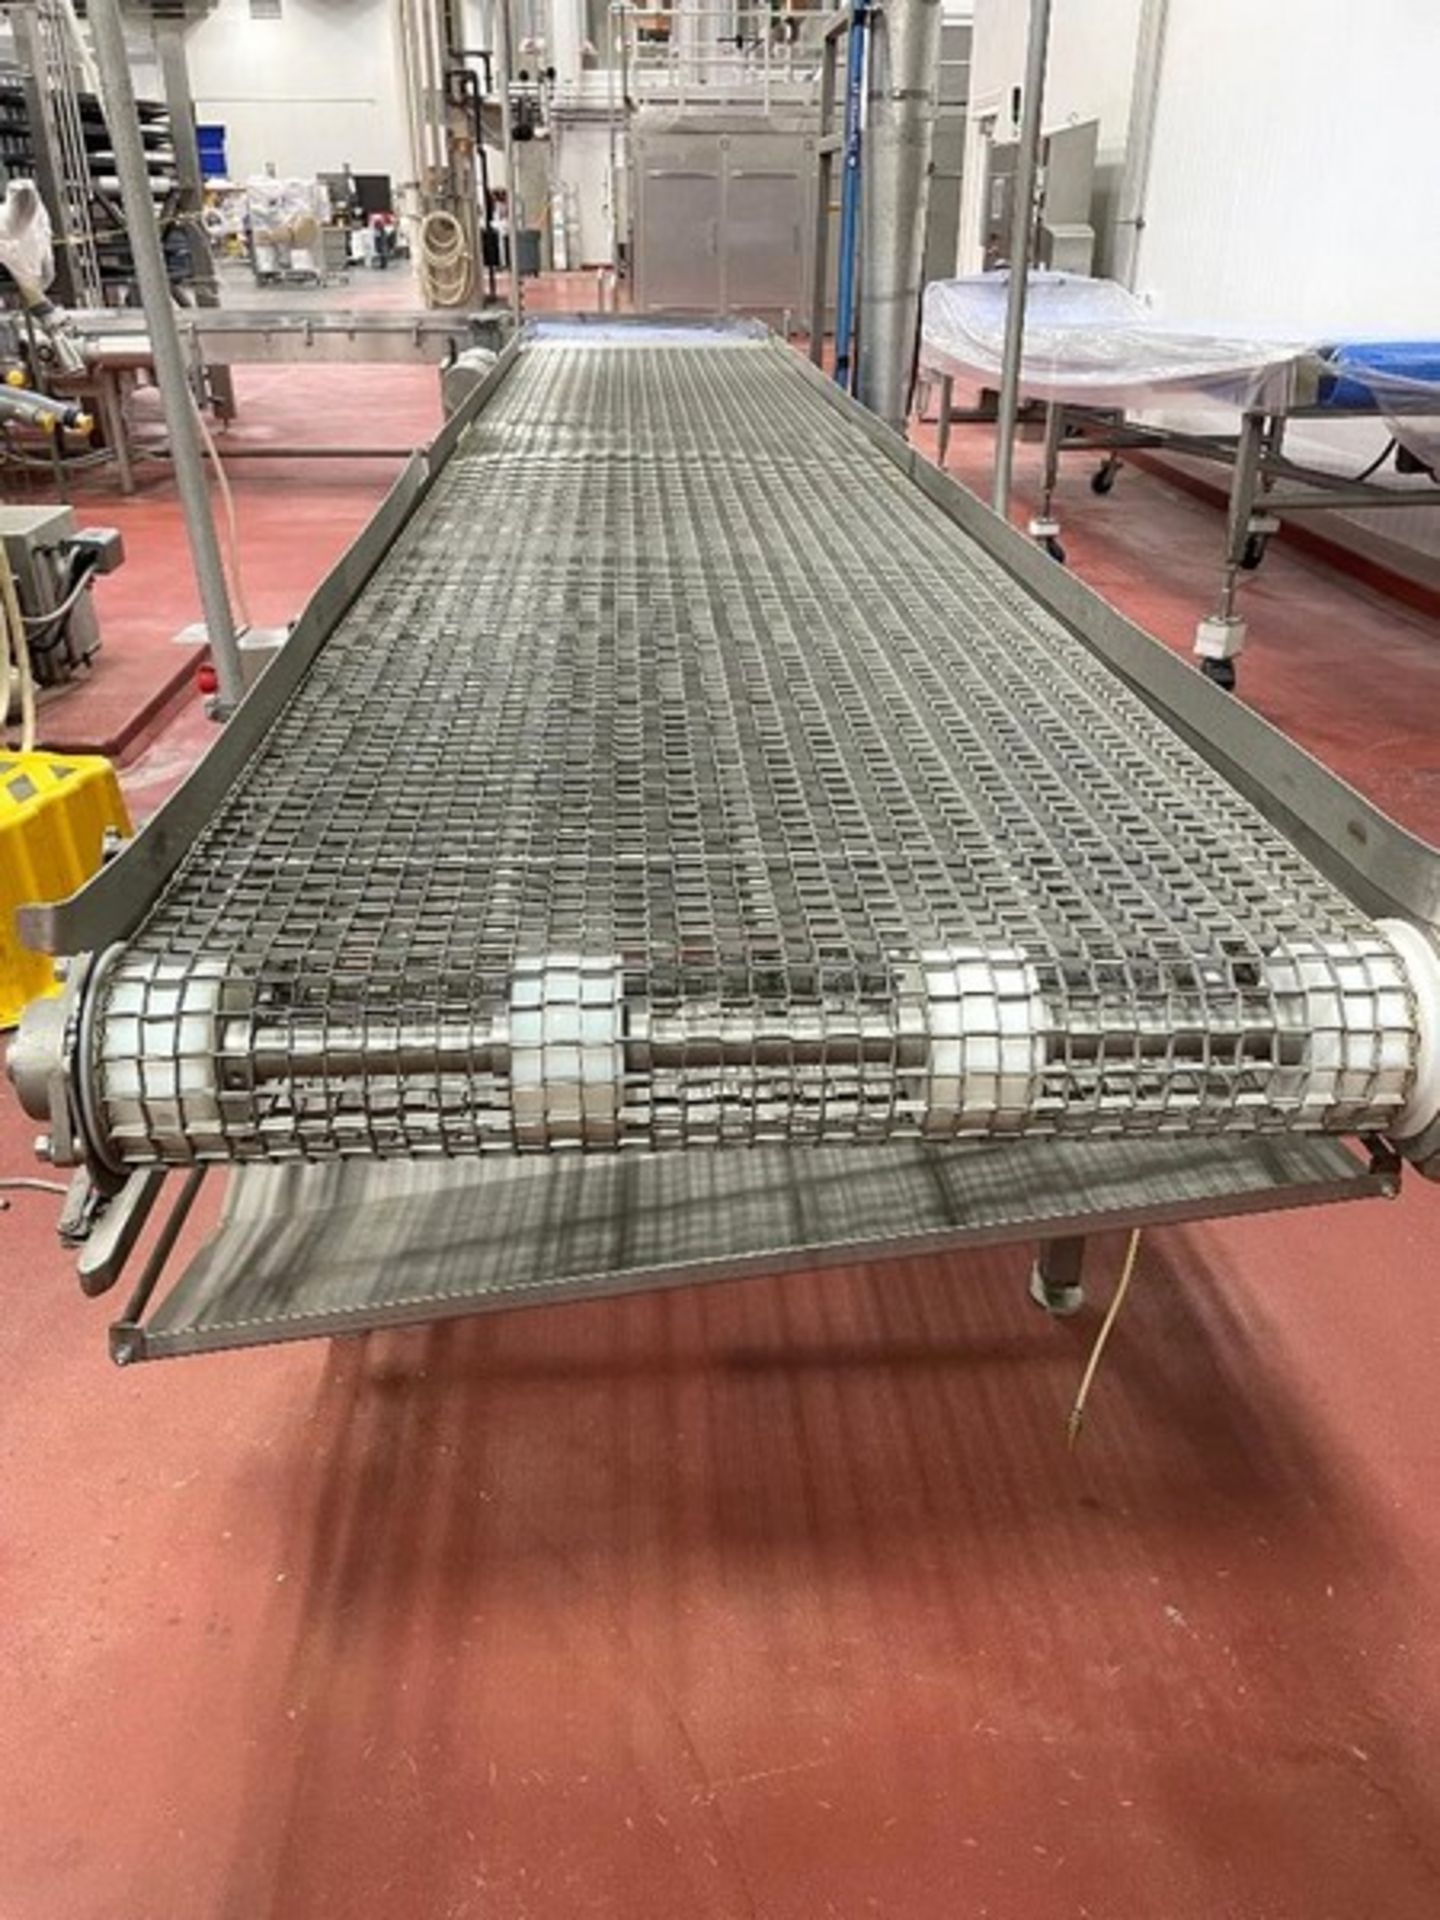 Aprox 36" Wide x 17 ft. Long S/S Sanitary Wire Mesh Belt Conveyor, System last used with Bagels - Image 3 of 8